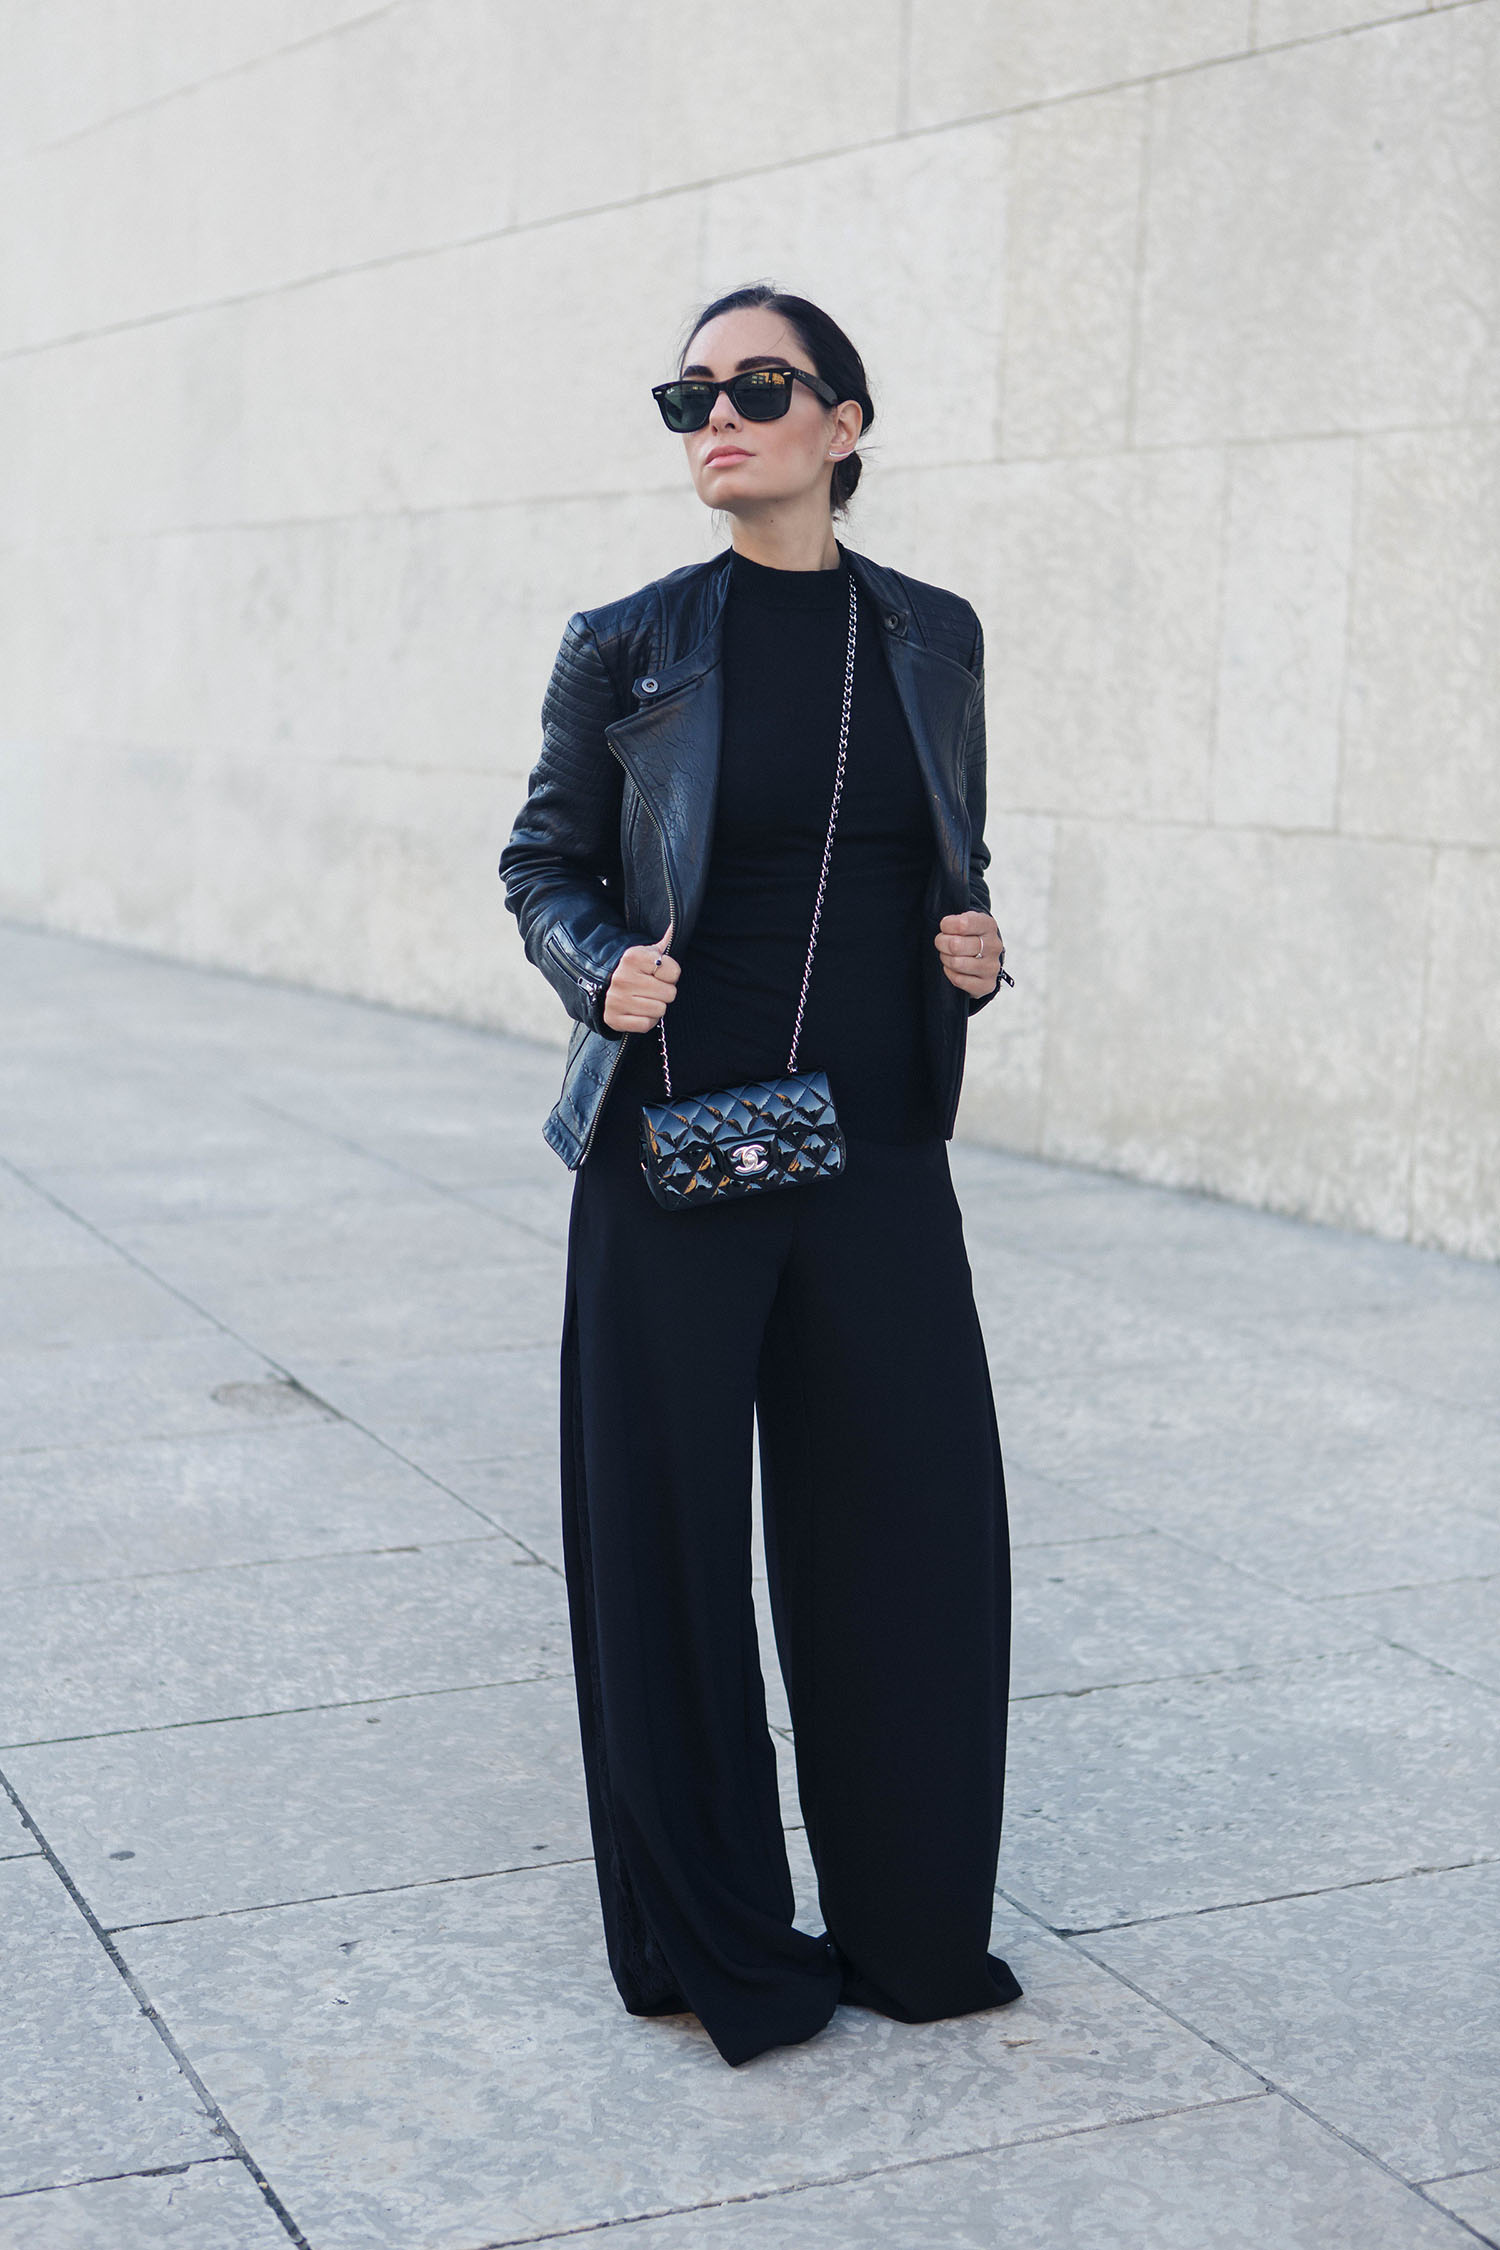 Fashion blogger Cee Fardoe of Coco & Vera photographed by Christa Wong Photography in all black everything, including Zara palazzo pants and a Chanel 2.55 handbag